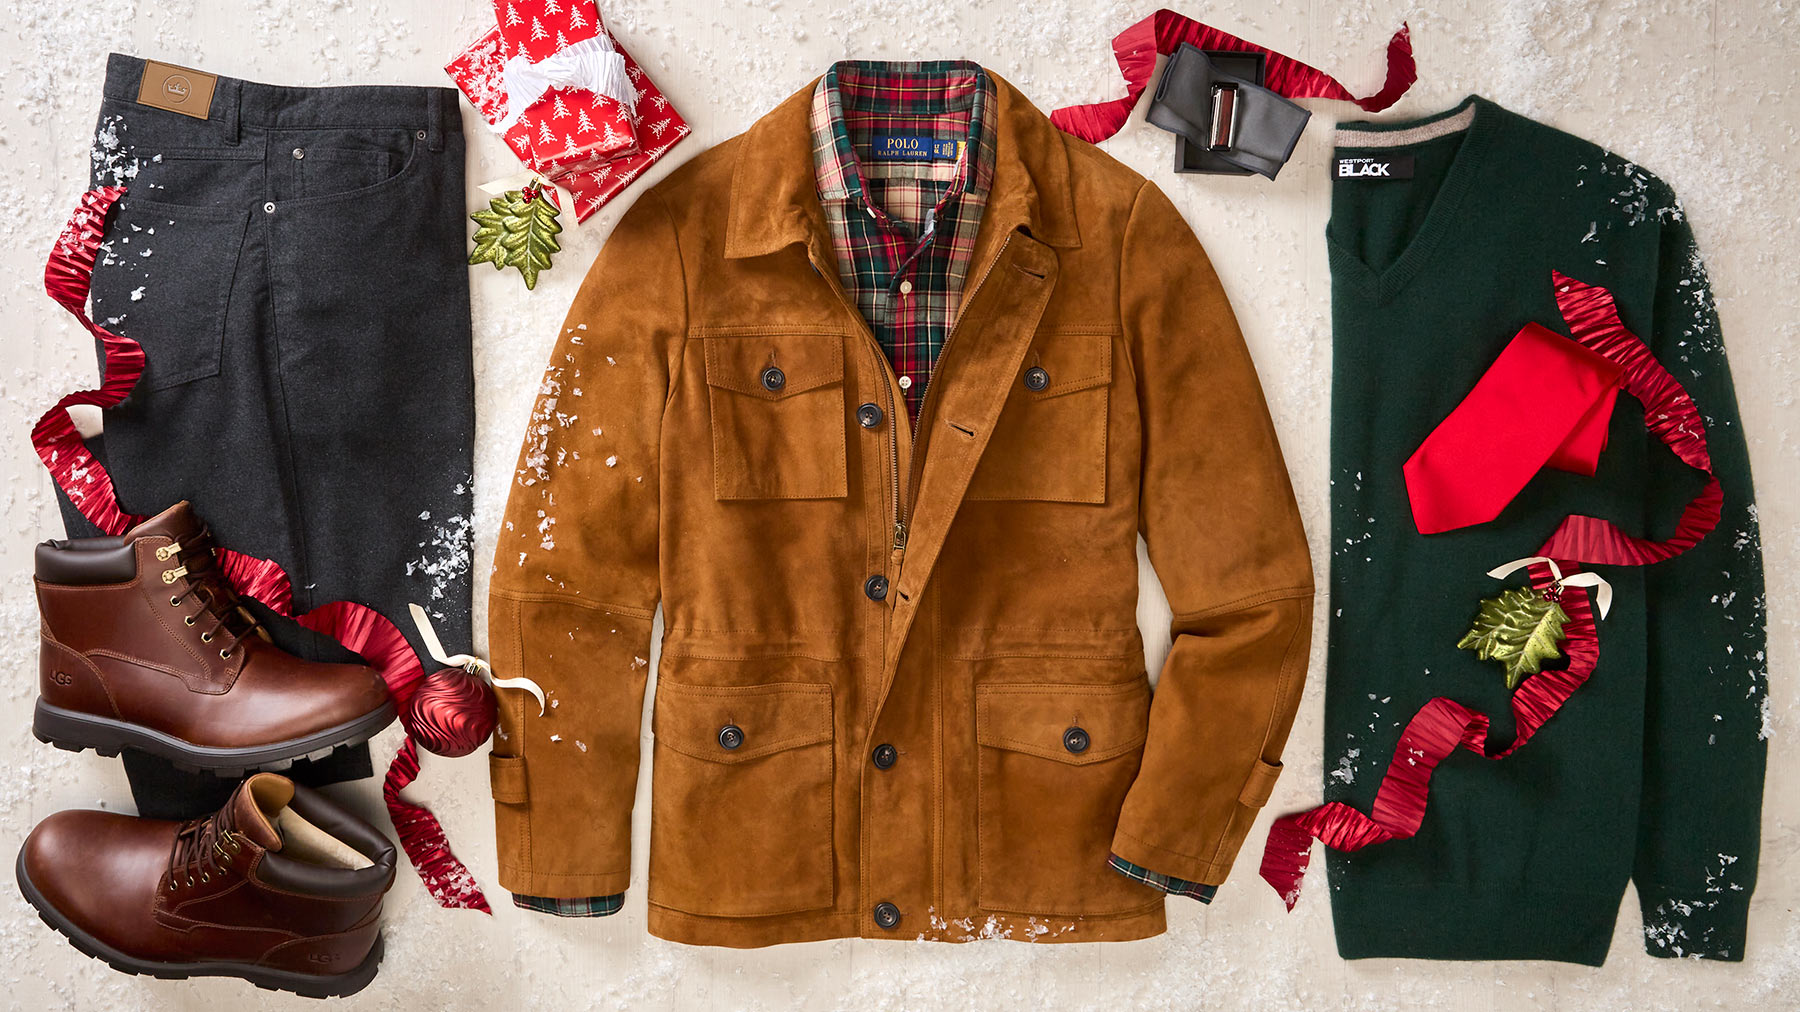 Assortment of holiday gifts such as boots, flannel pants, leather jacket, and sweater